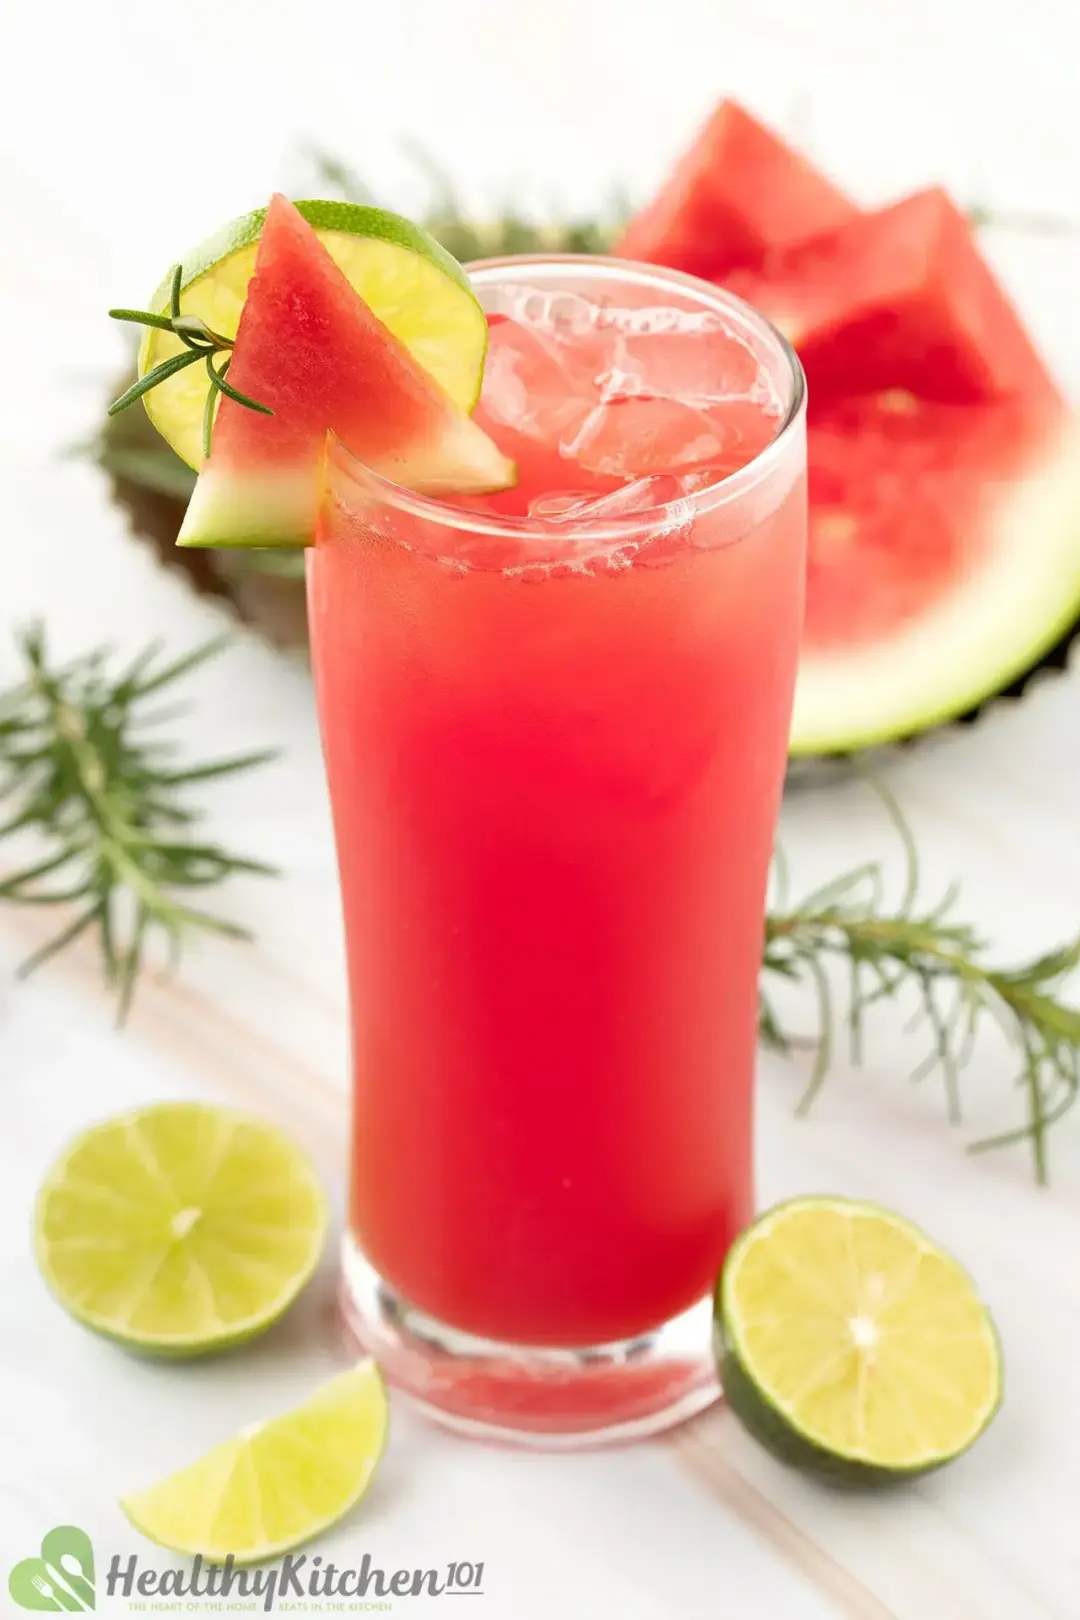 An iced glass of watermelon drink, garnished with lime wheels and watermelon in the background